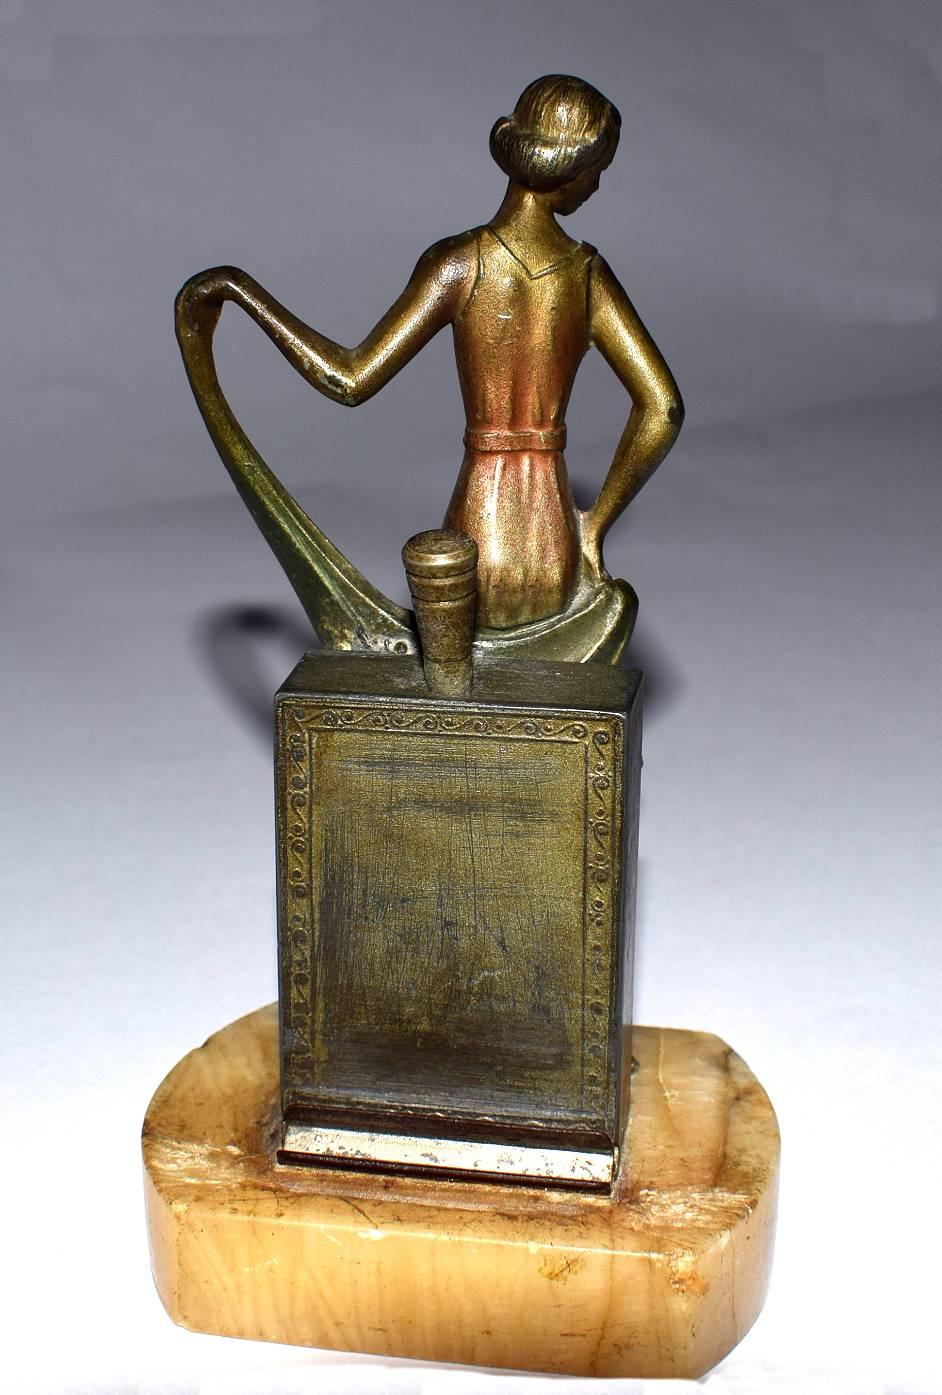 Delightful 1930s table lighter depicting a young lady. She's made from spelter and cold painted on top. Quite a weighty little item considering it's size. There is a dauber to the back and a recess resting area, not completely sure how it works but